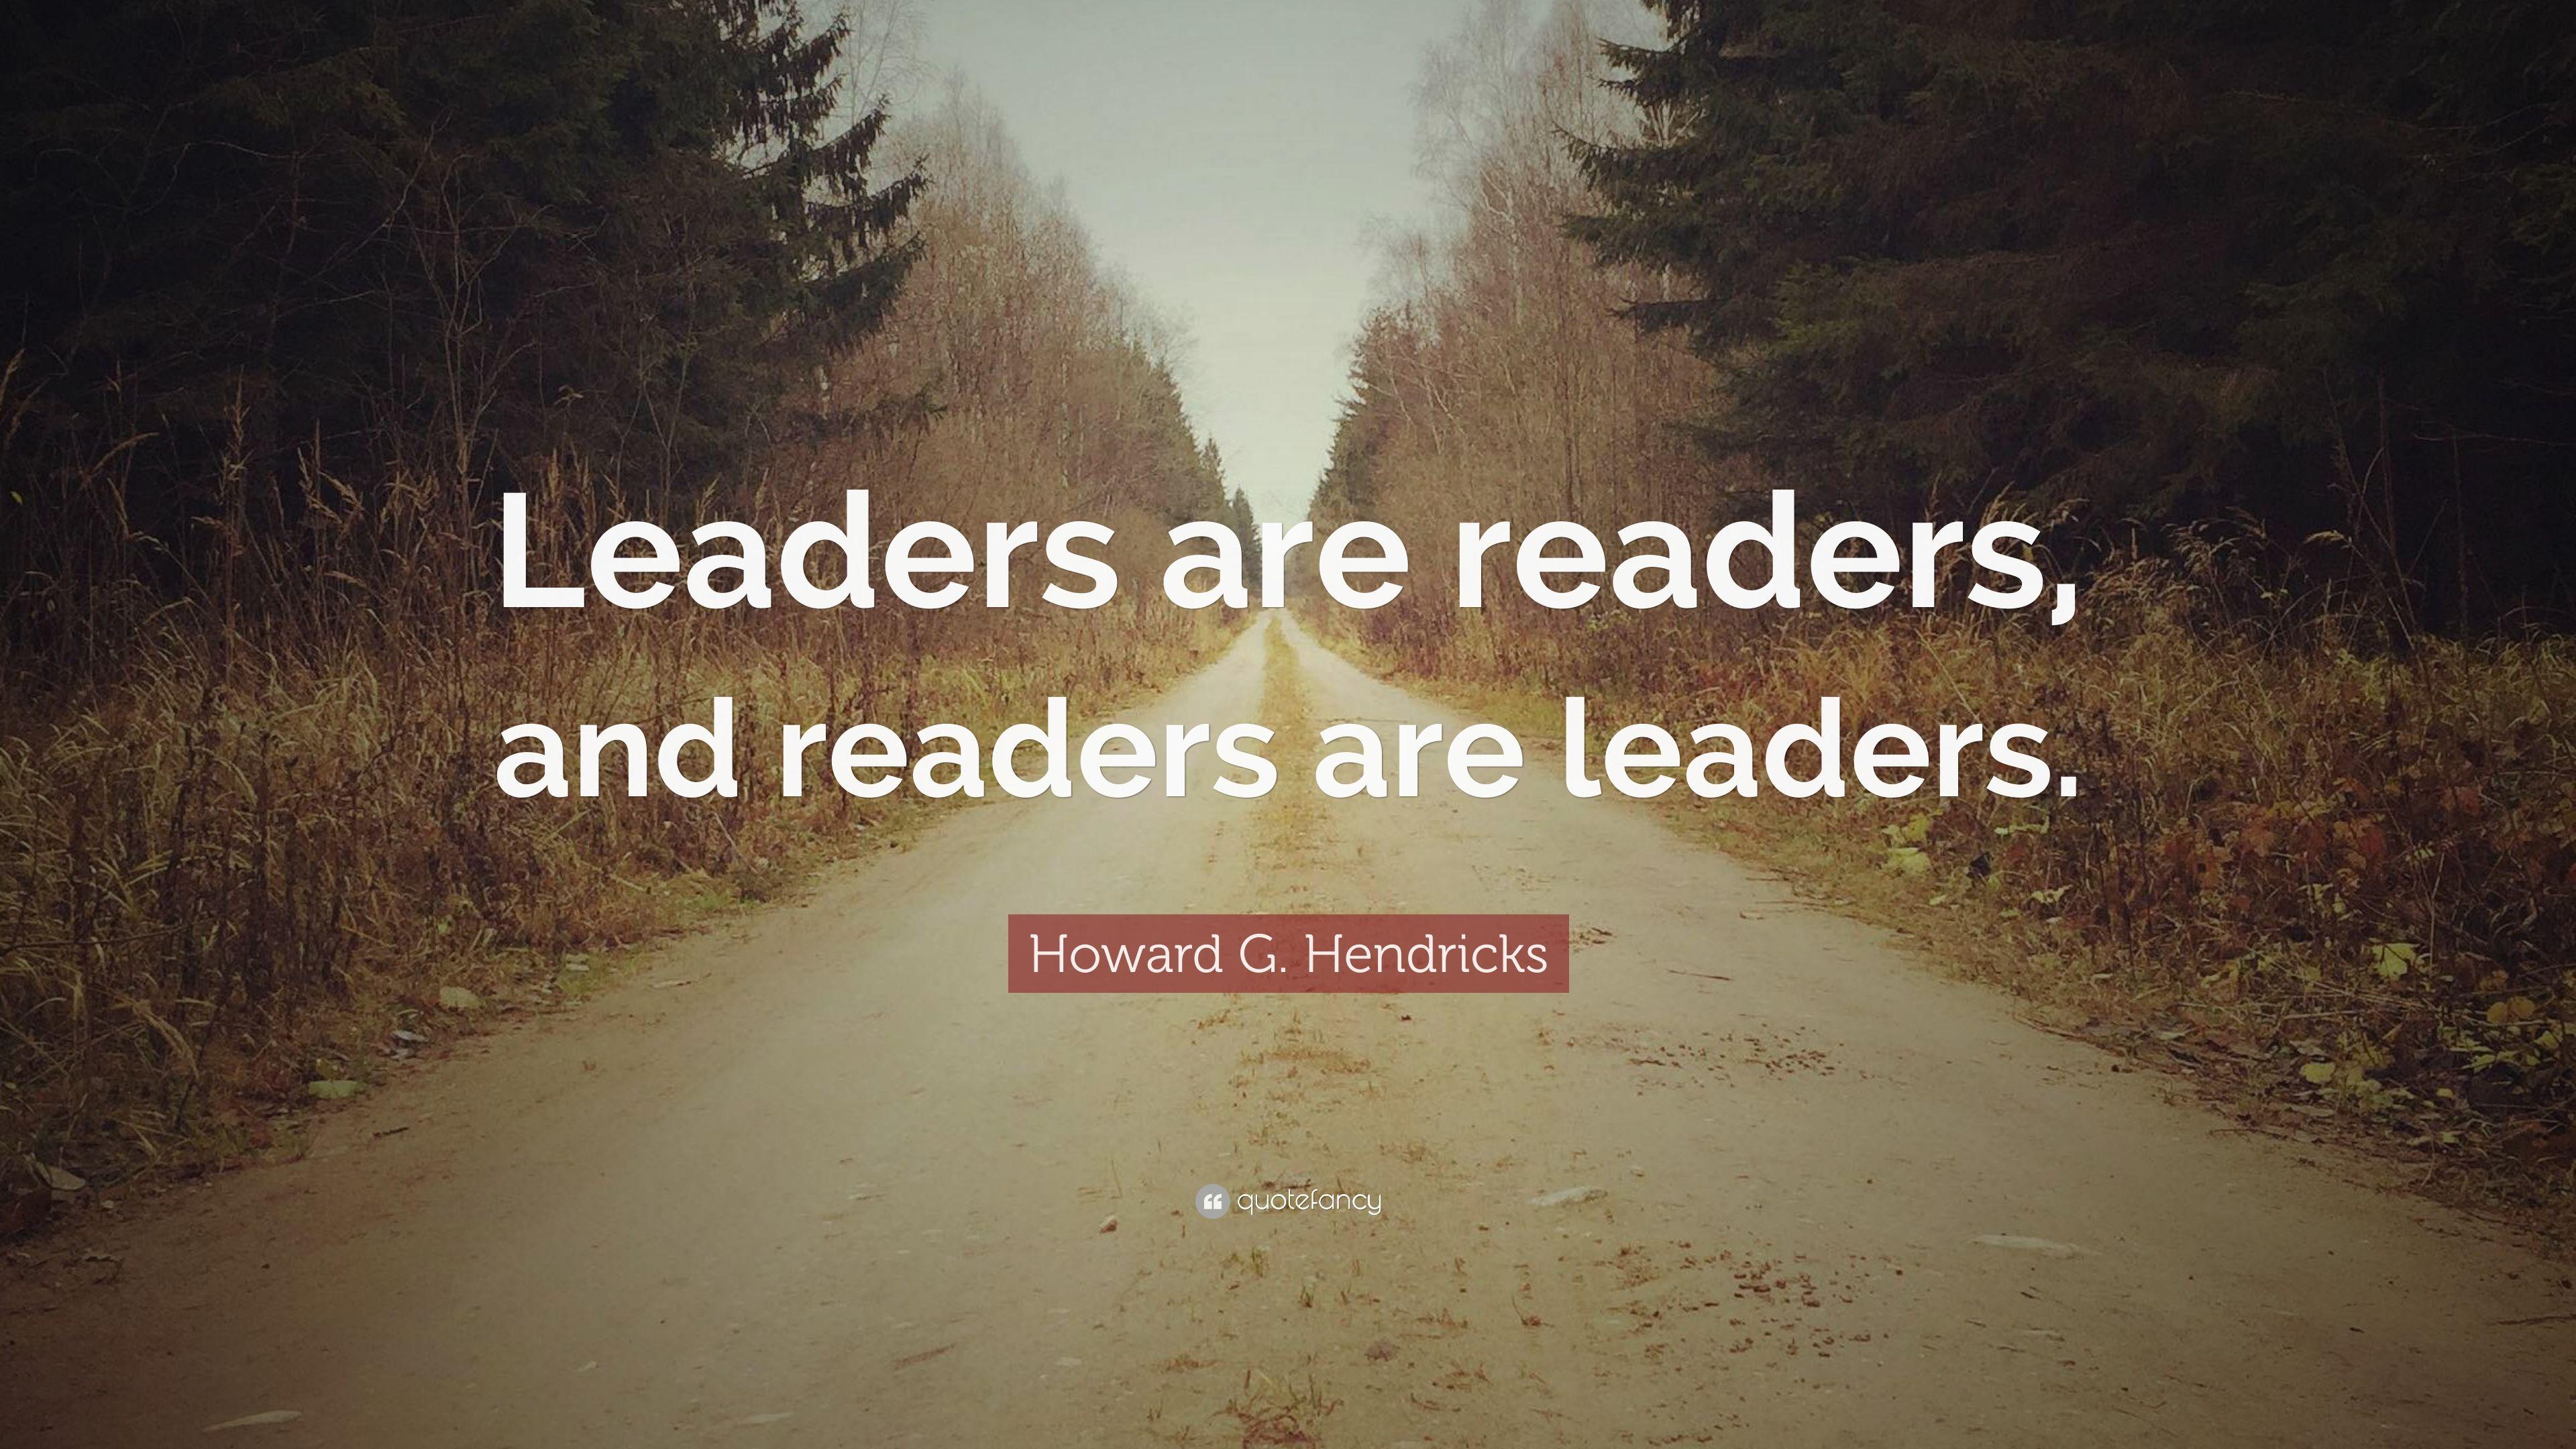 Howard G. Hendricks Quote: “Leaders are readers, and readers